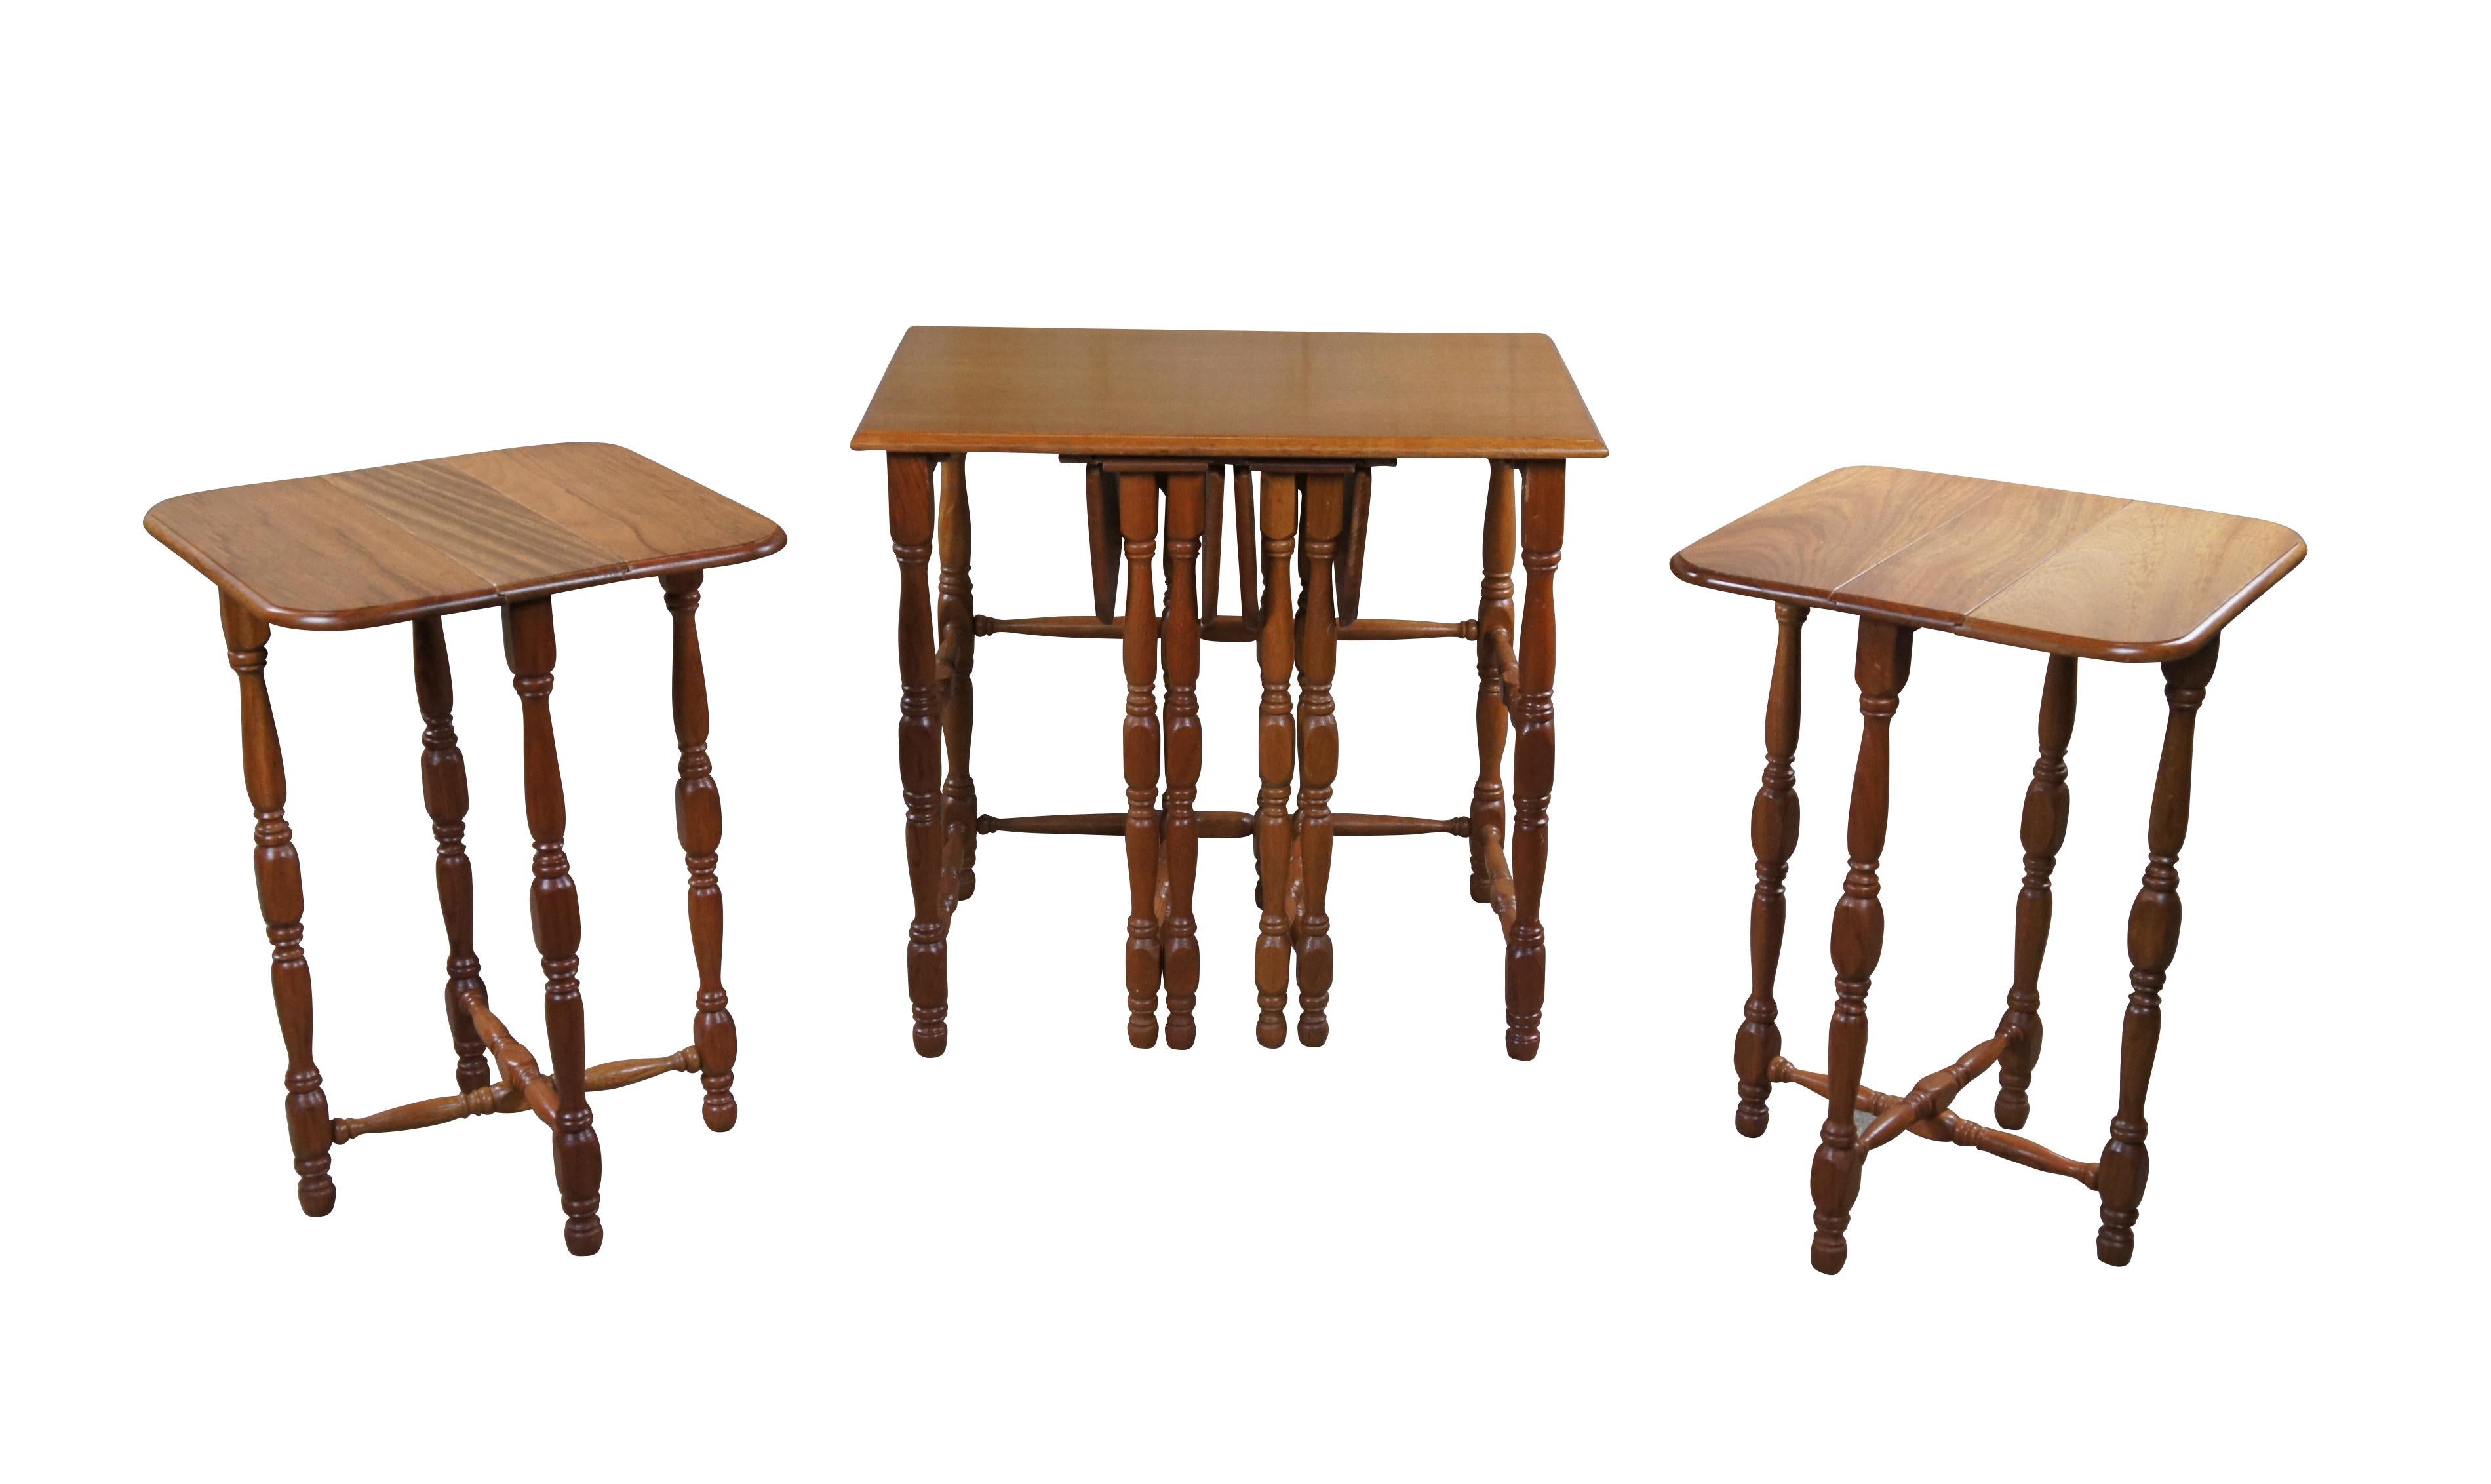 Intriguing set of farmhouse nesting tables. Made from oak with a carrier or larger side table that houses each of the four drop leaf nesting tables.   Nesting tables. Features turned legs and X formed base when opened.

Dimensions:
25